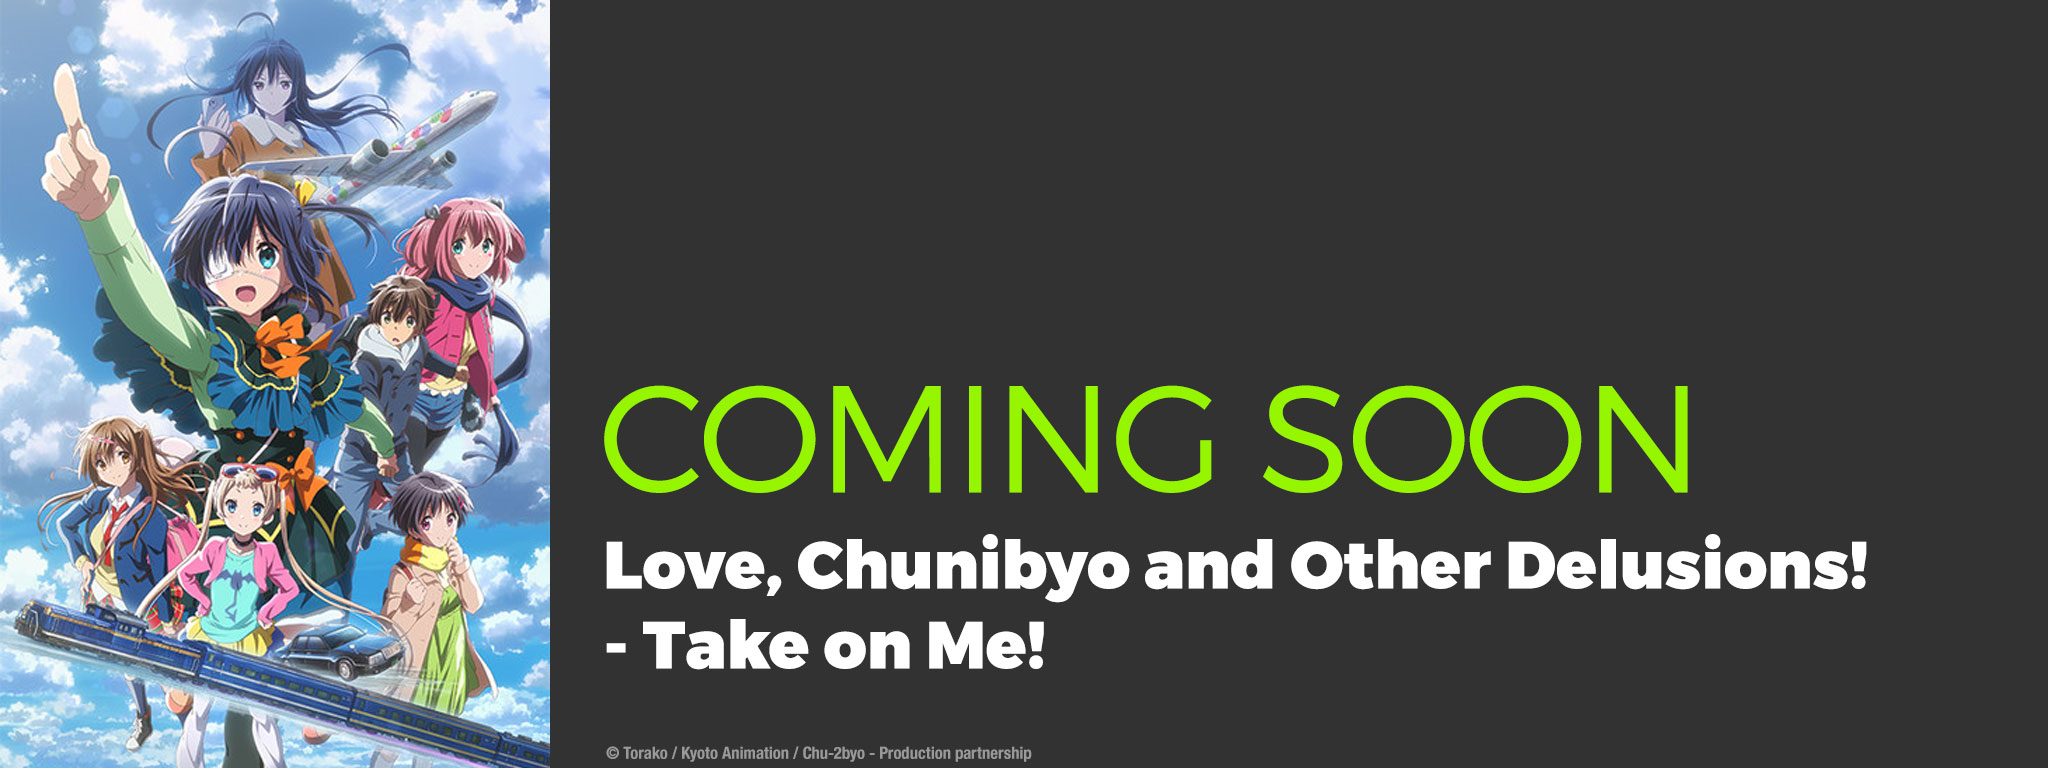 Title Art for Love, Chunibyo and Other Delusions - Take on Me!